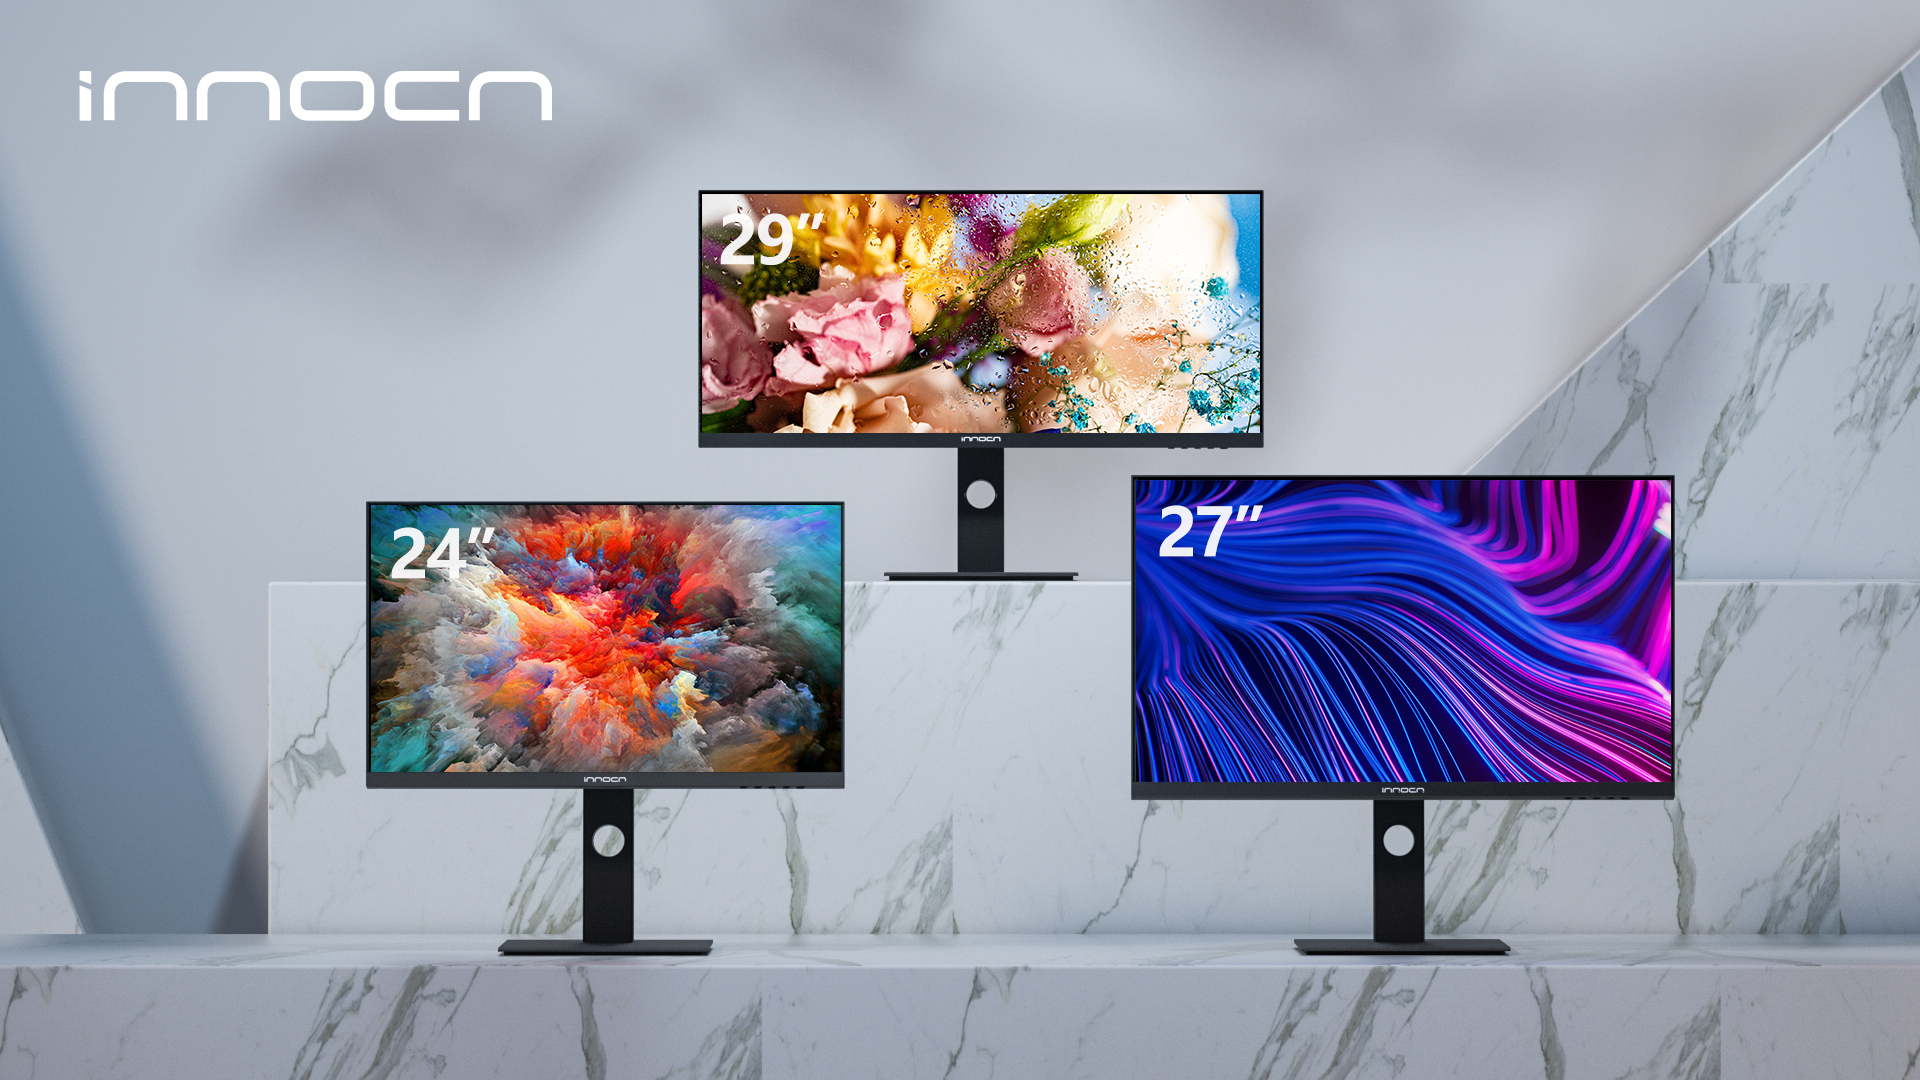 INNOCN's Art Monitor Collection is the Ideal Device for Creators and Designers